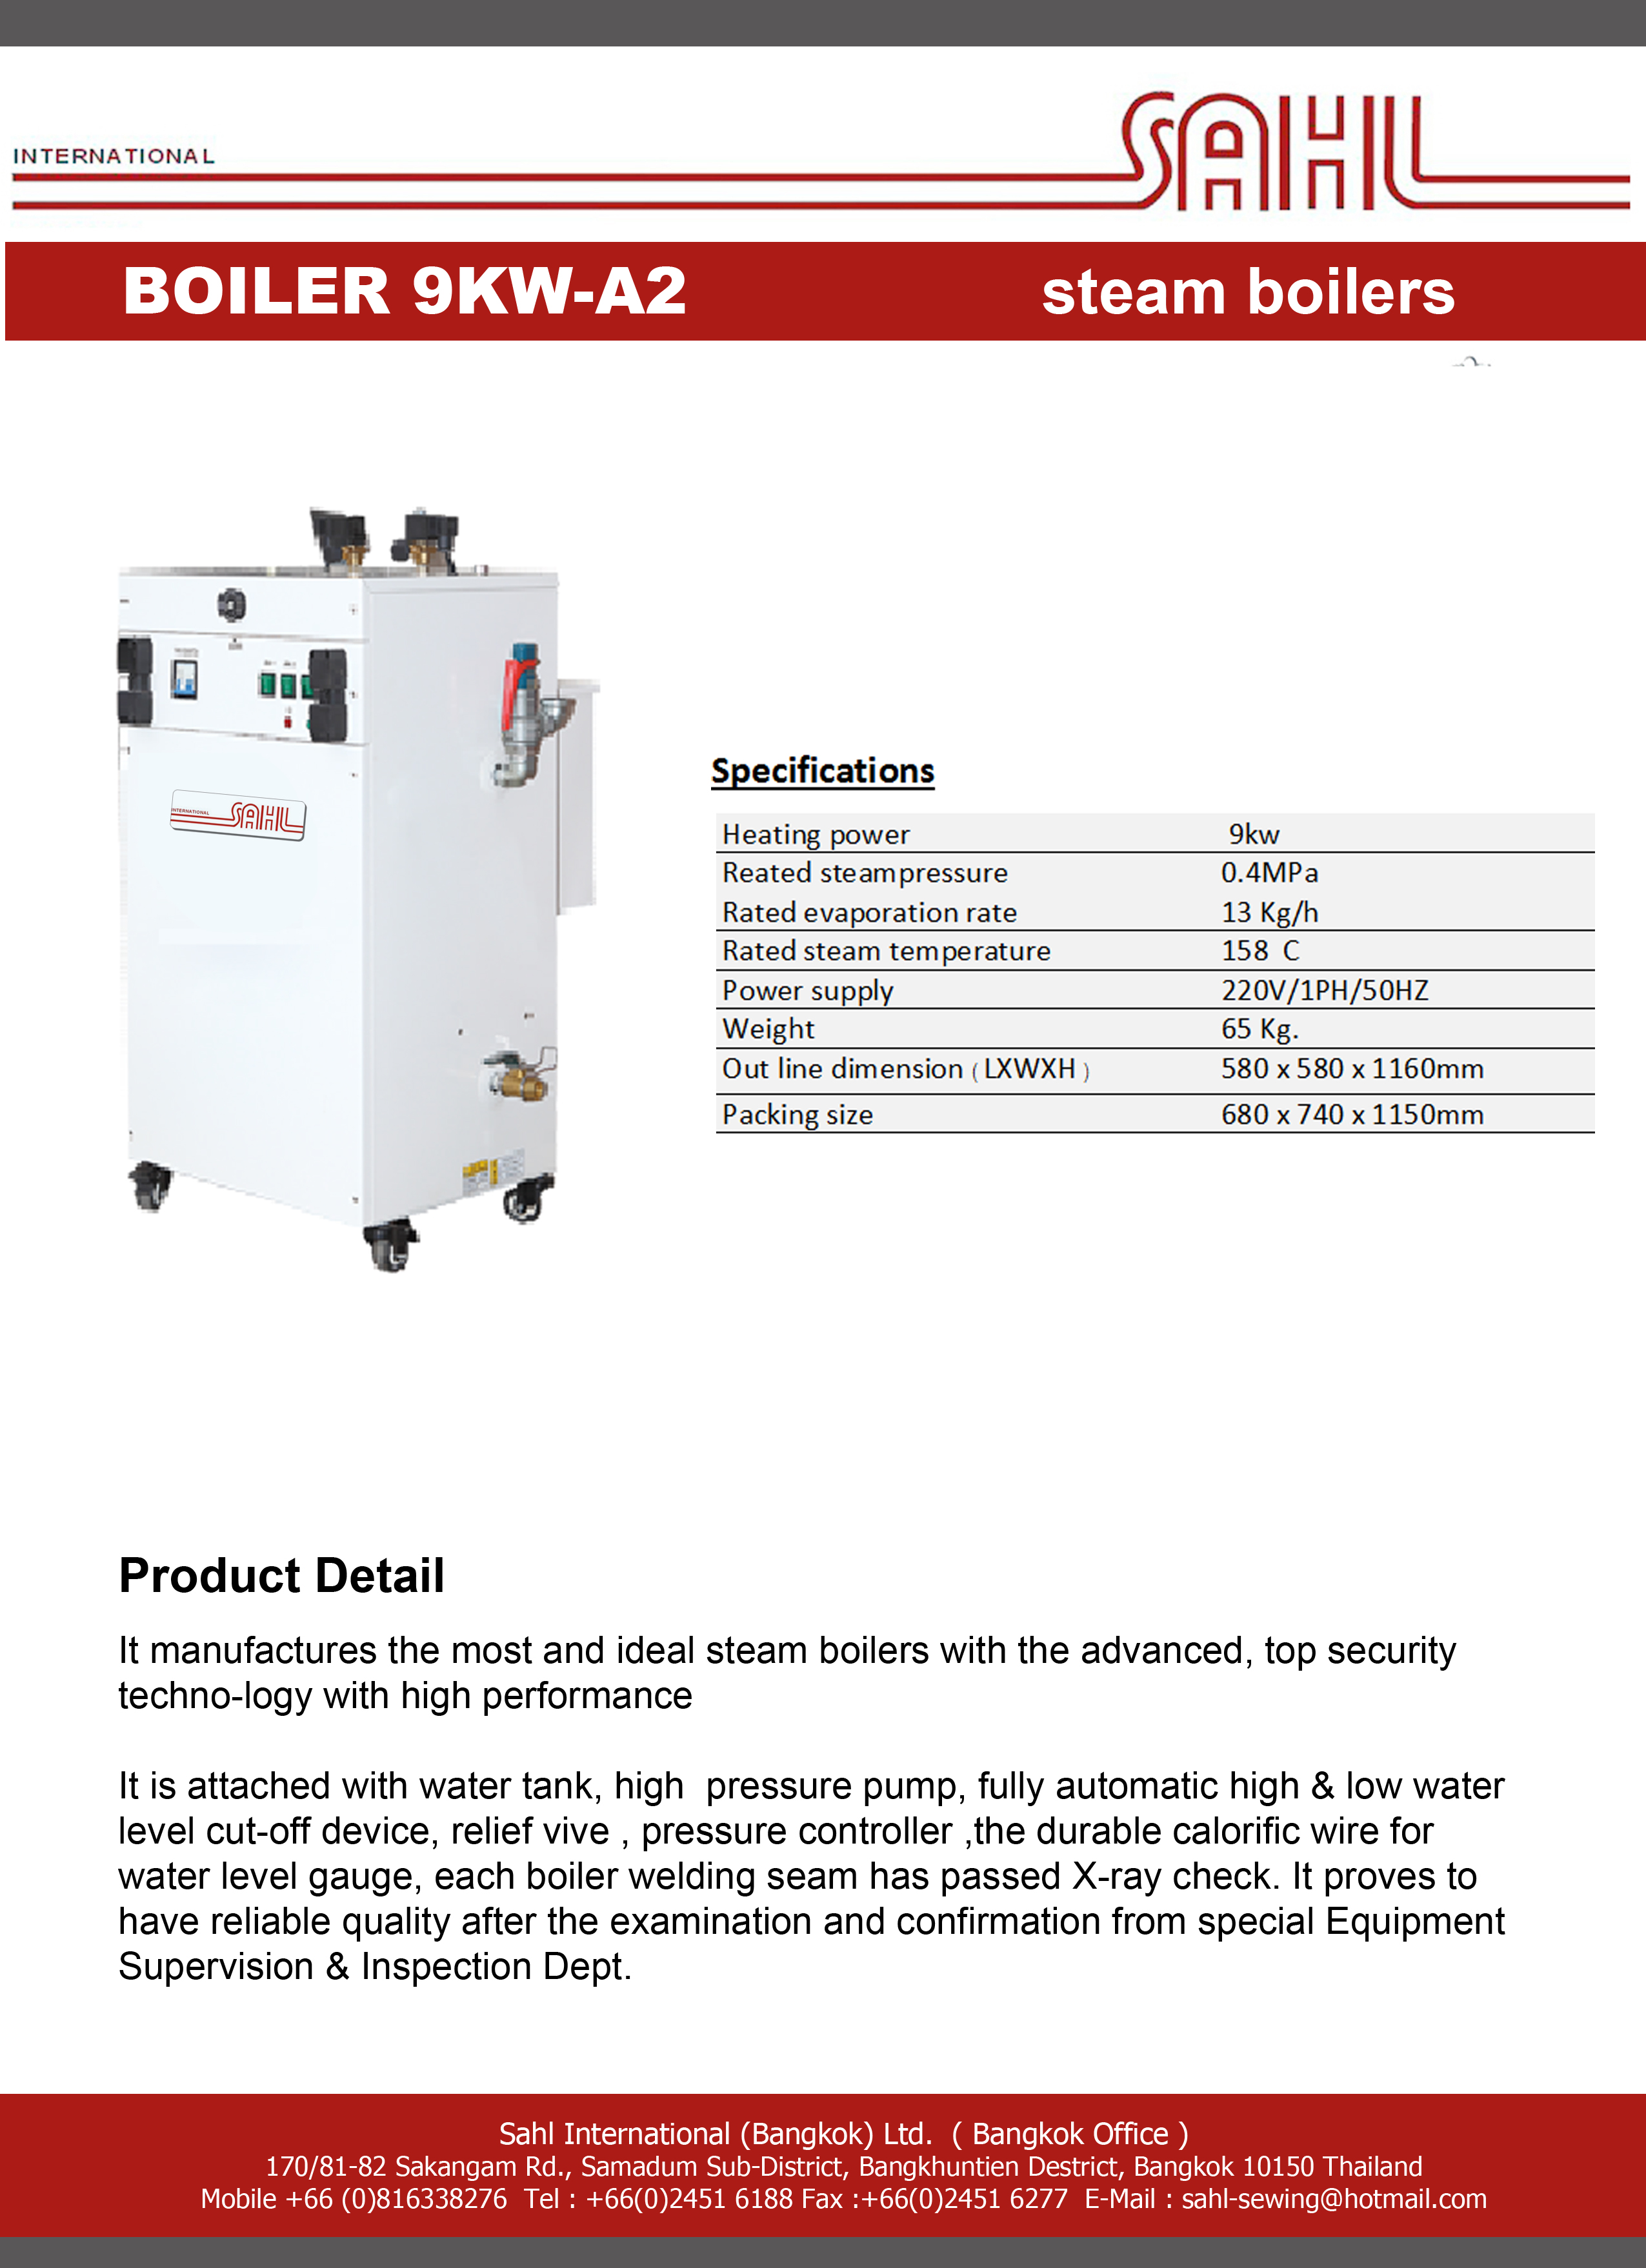 ELECTRIC HEATED STEAM BOILER 